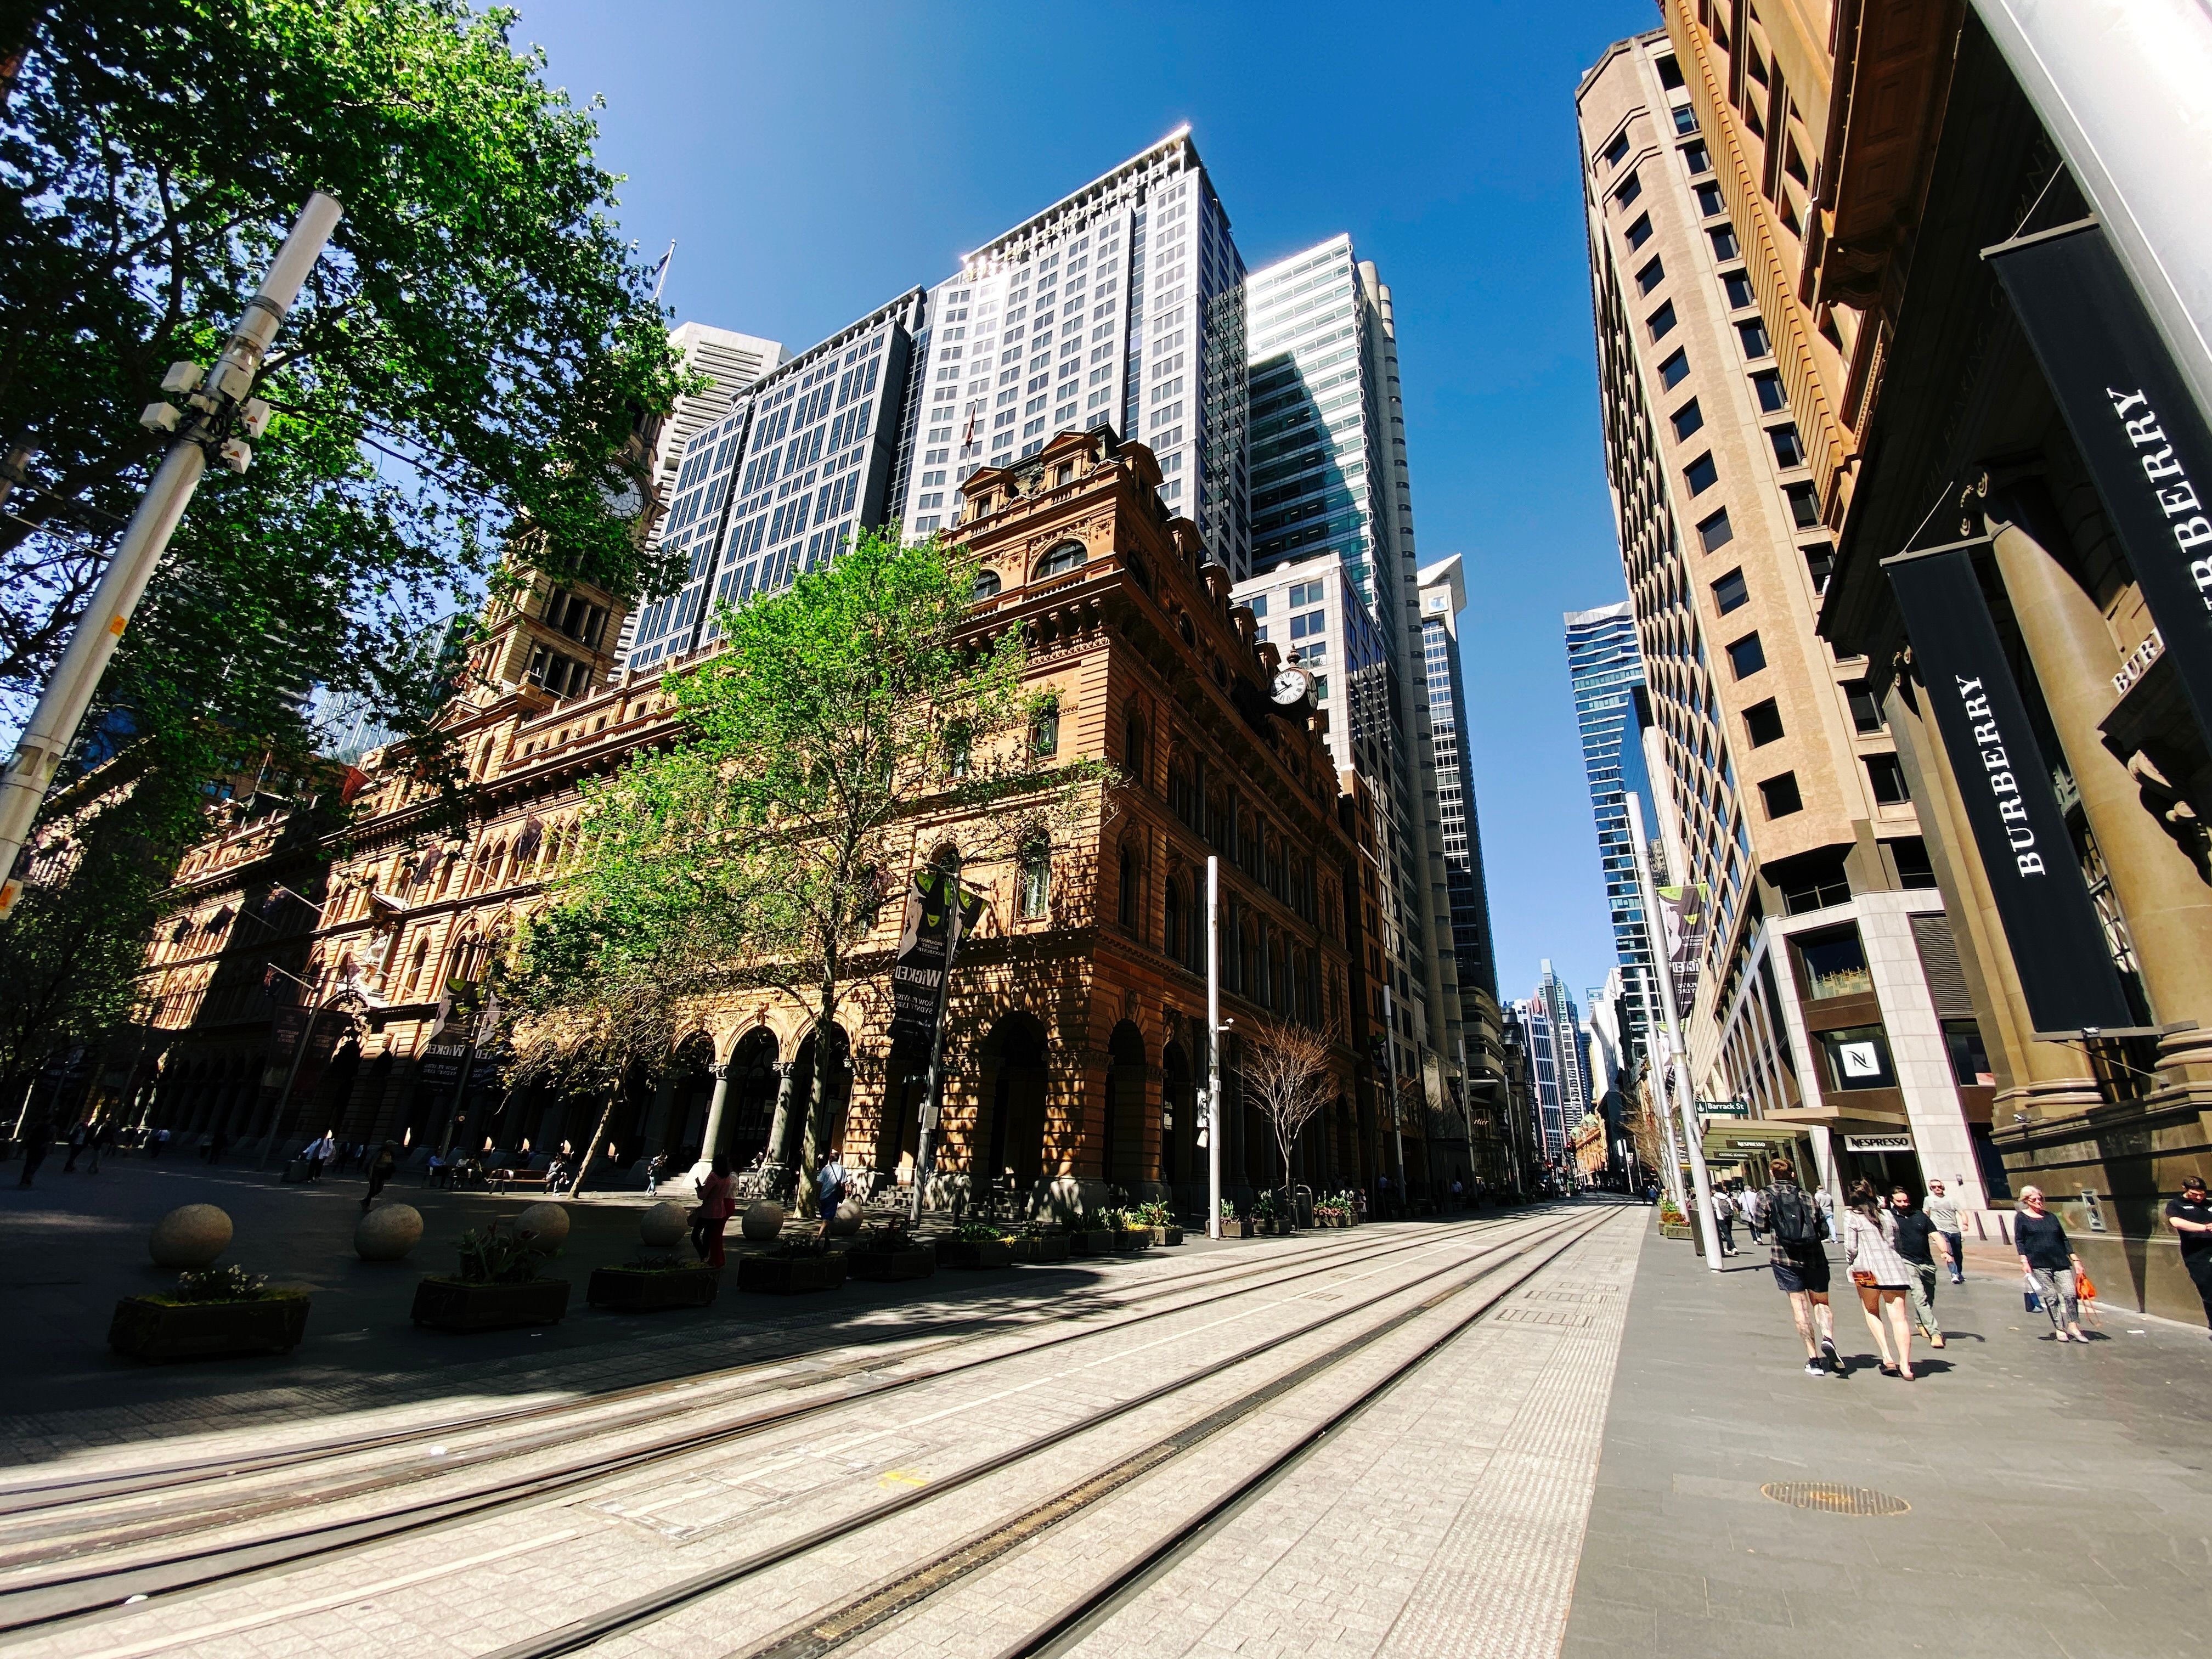 A wide-angle photo taken from George St in Sydney. There's tram tracks running down the street, tall buildings on either side, and a nice big green tree at the left. It's delightfully sunny and the sky is blue.